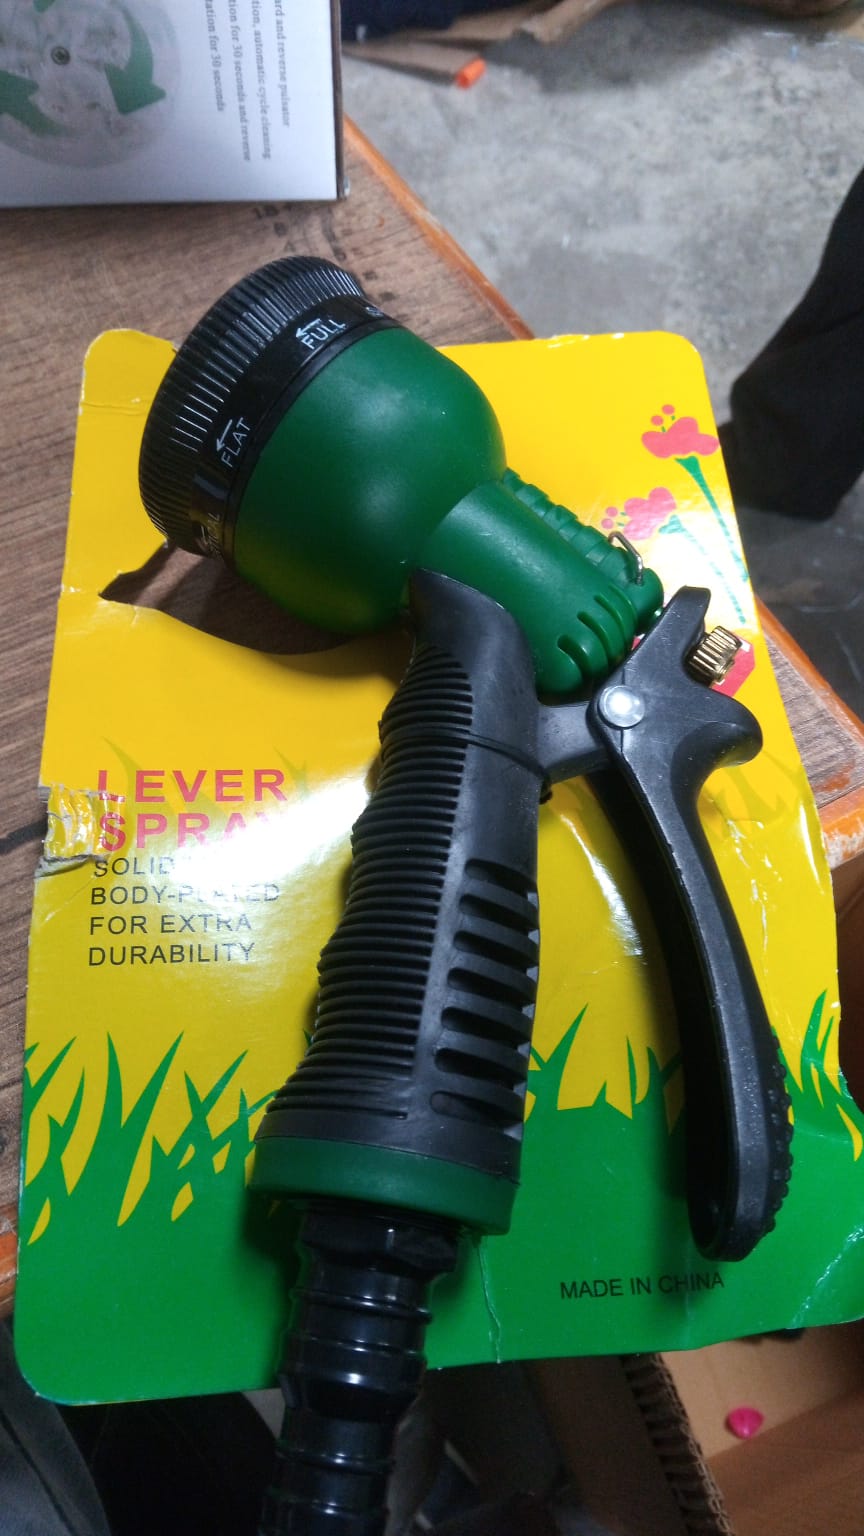 Adjustable 8 Pattern Water Spray Gun Trigger High Pressure For vehicle & cleaning Garden Lawn, Grass rinse, flat, soak & washing for Car Bike Plants Pressure Washer water Nozzle